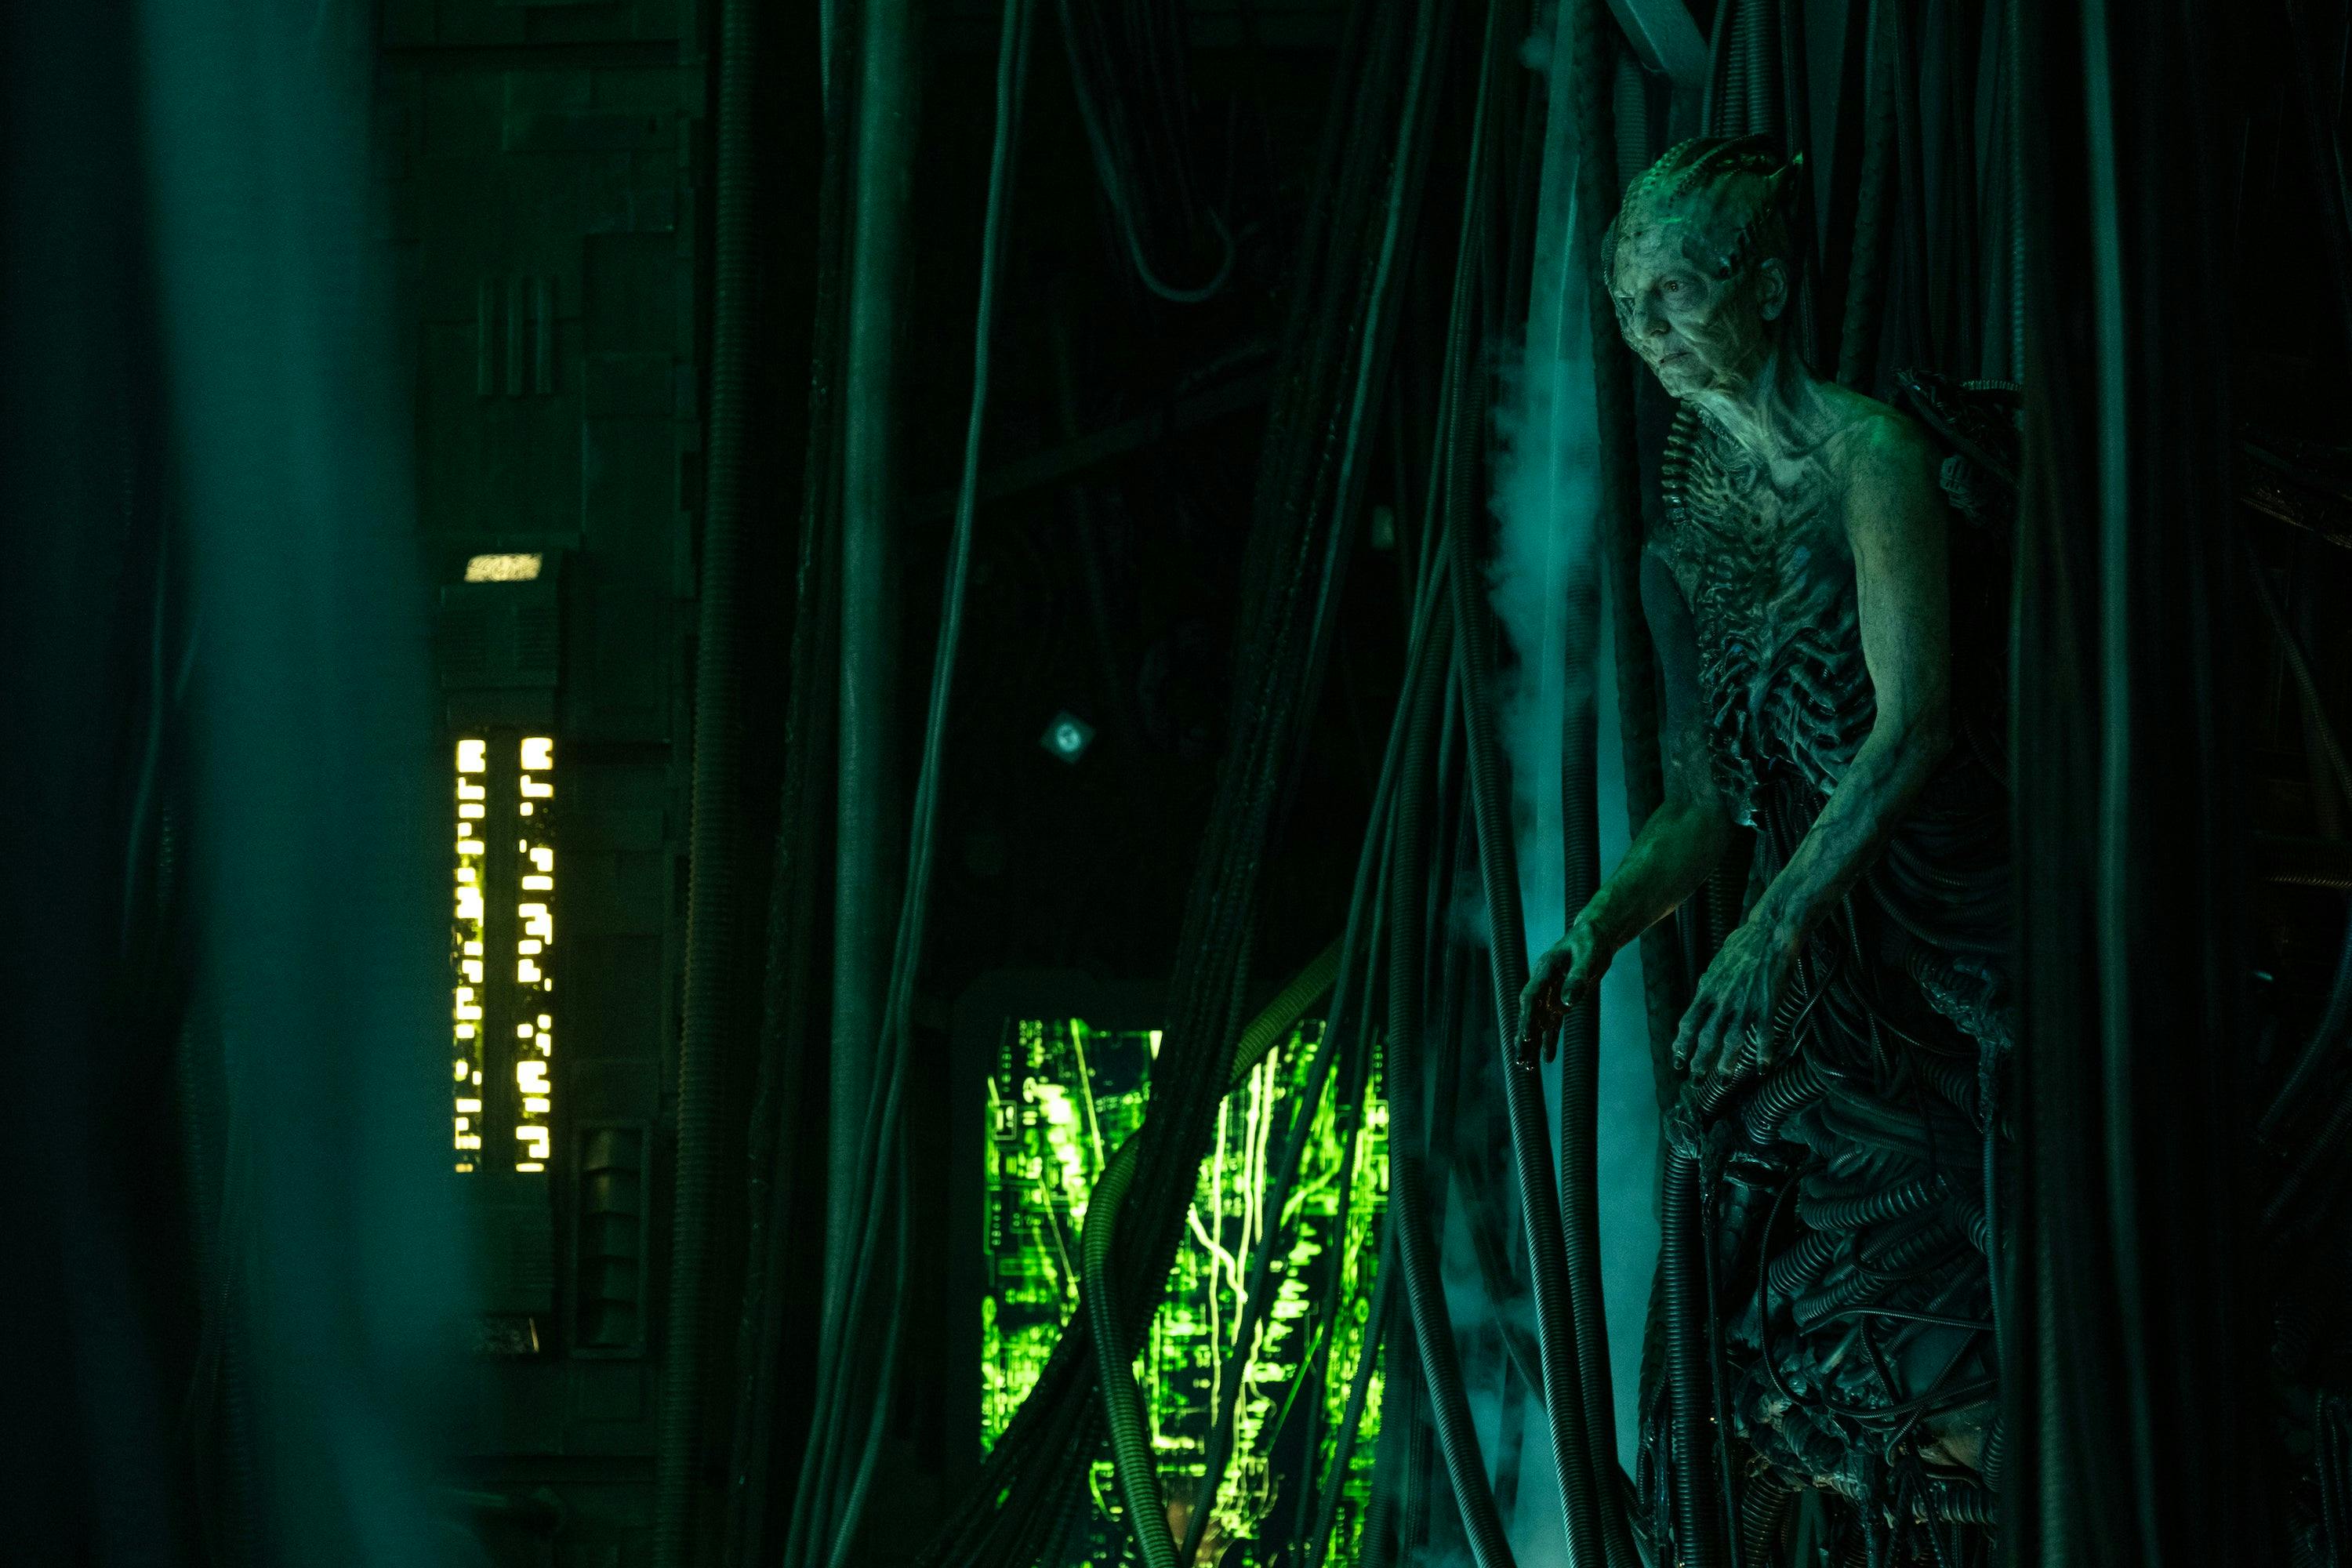 On the Borg Cube, the Borg Queen stands above in a frail state in 'The Last Generation'